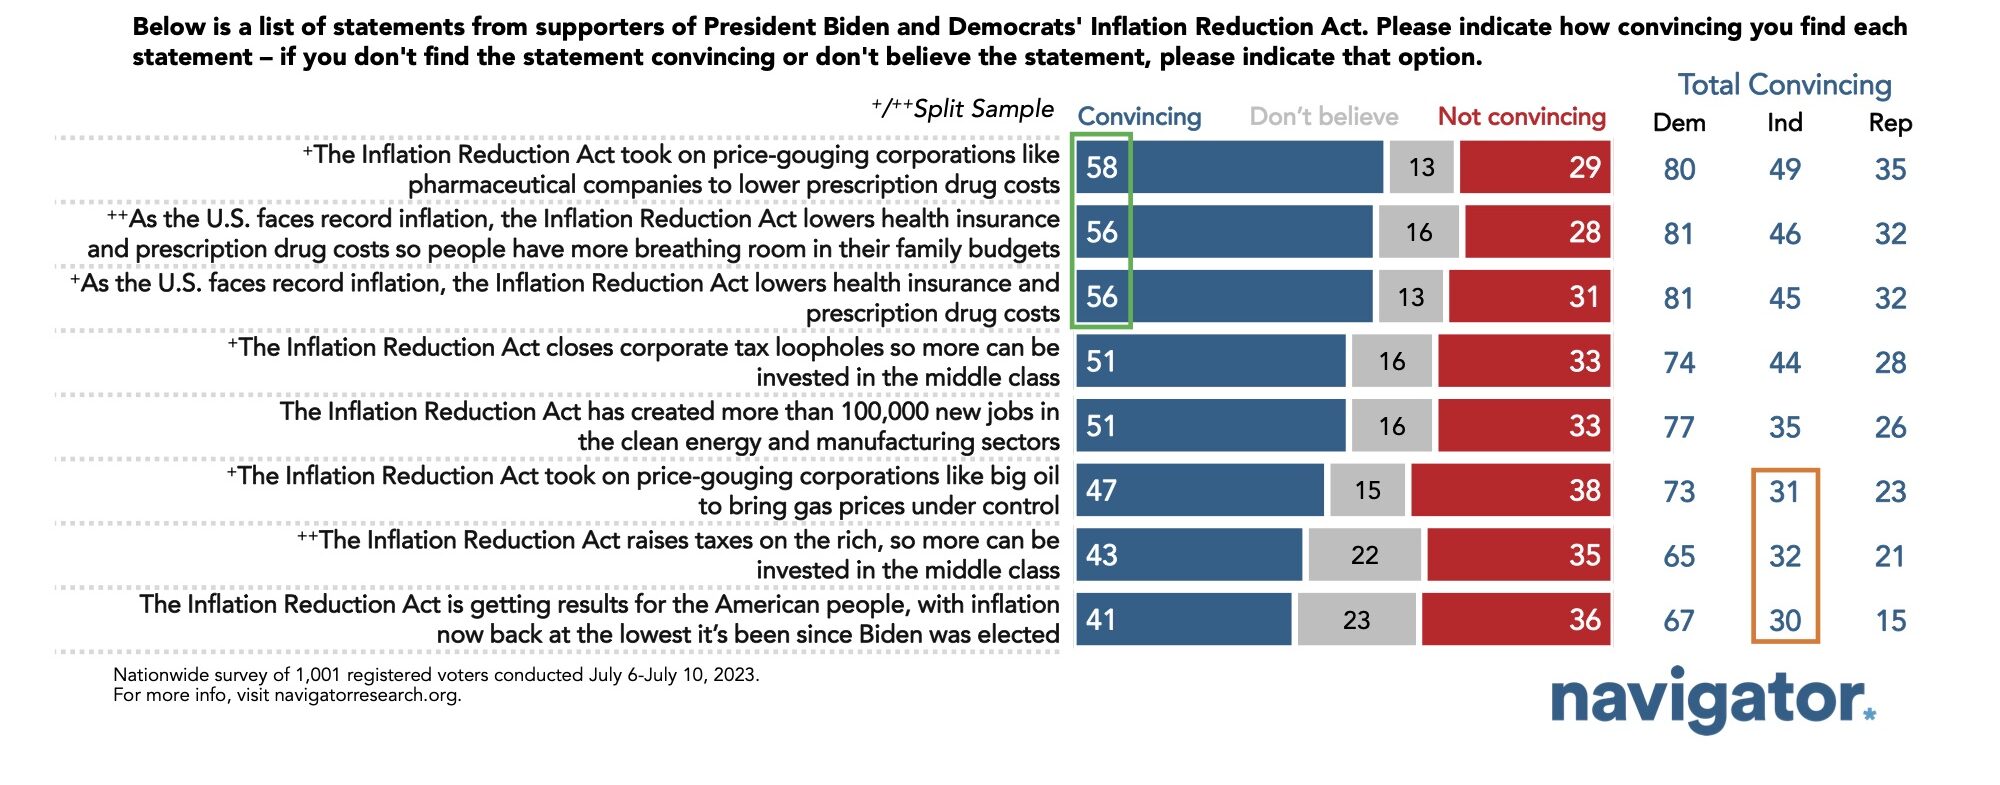 Survey results to the following prompt: Below is a list of statements from supporters of President Biden and Democrats' Inflation Reduction Act. Please indicate how convincing you find each statement – if you don't find the statement convincing or don't believe the statement, please indicate that option.